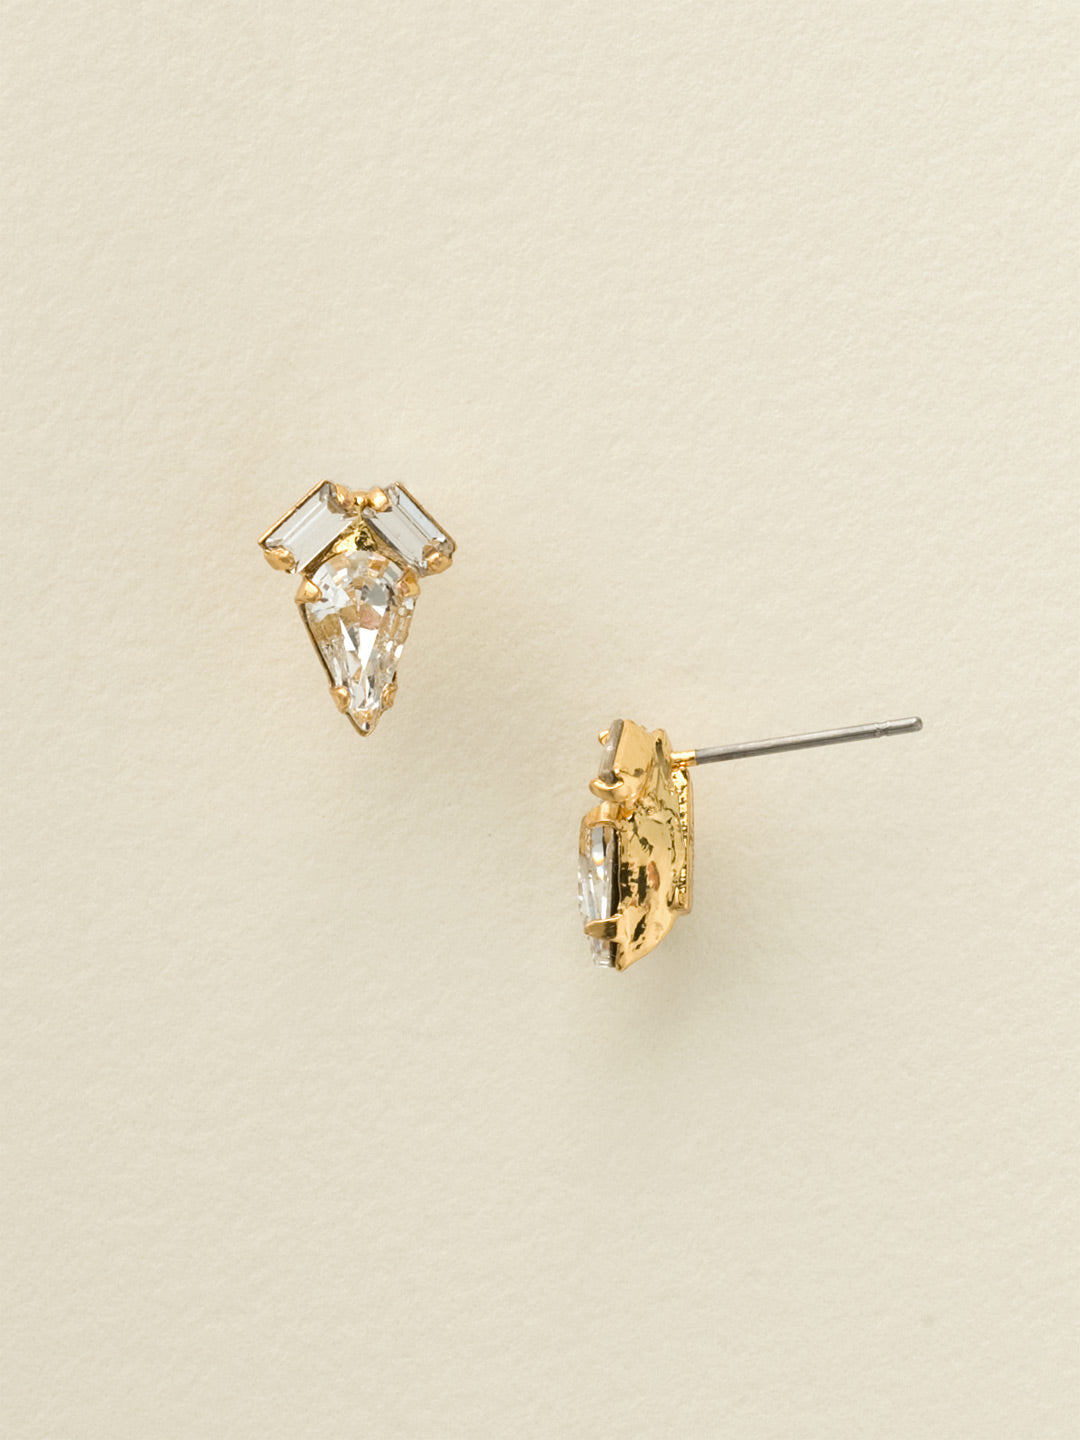 Petite Teardrop and Baguette Post Earring - EDC1BGCRY - <p>These sweet baubles feature a small, teardrop crystal accentuated by two crystal baguettes. Just the way to add a little subtle sparkle to your look. From Sorrelli's Crystal collection in our Bright Gold-tone finish.</p>